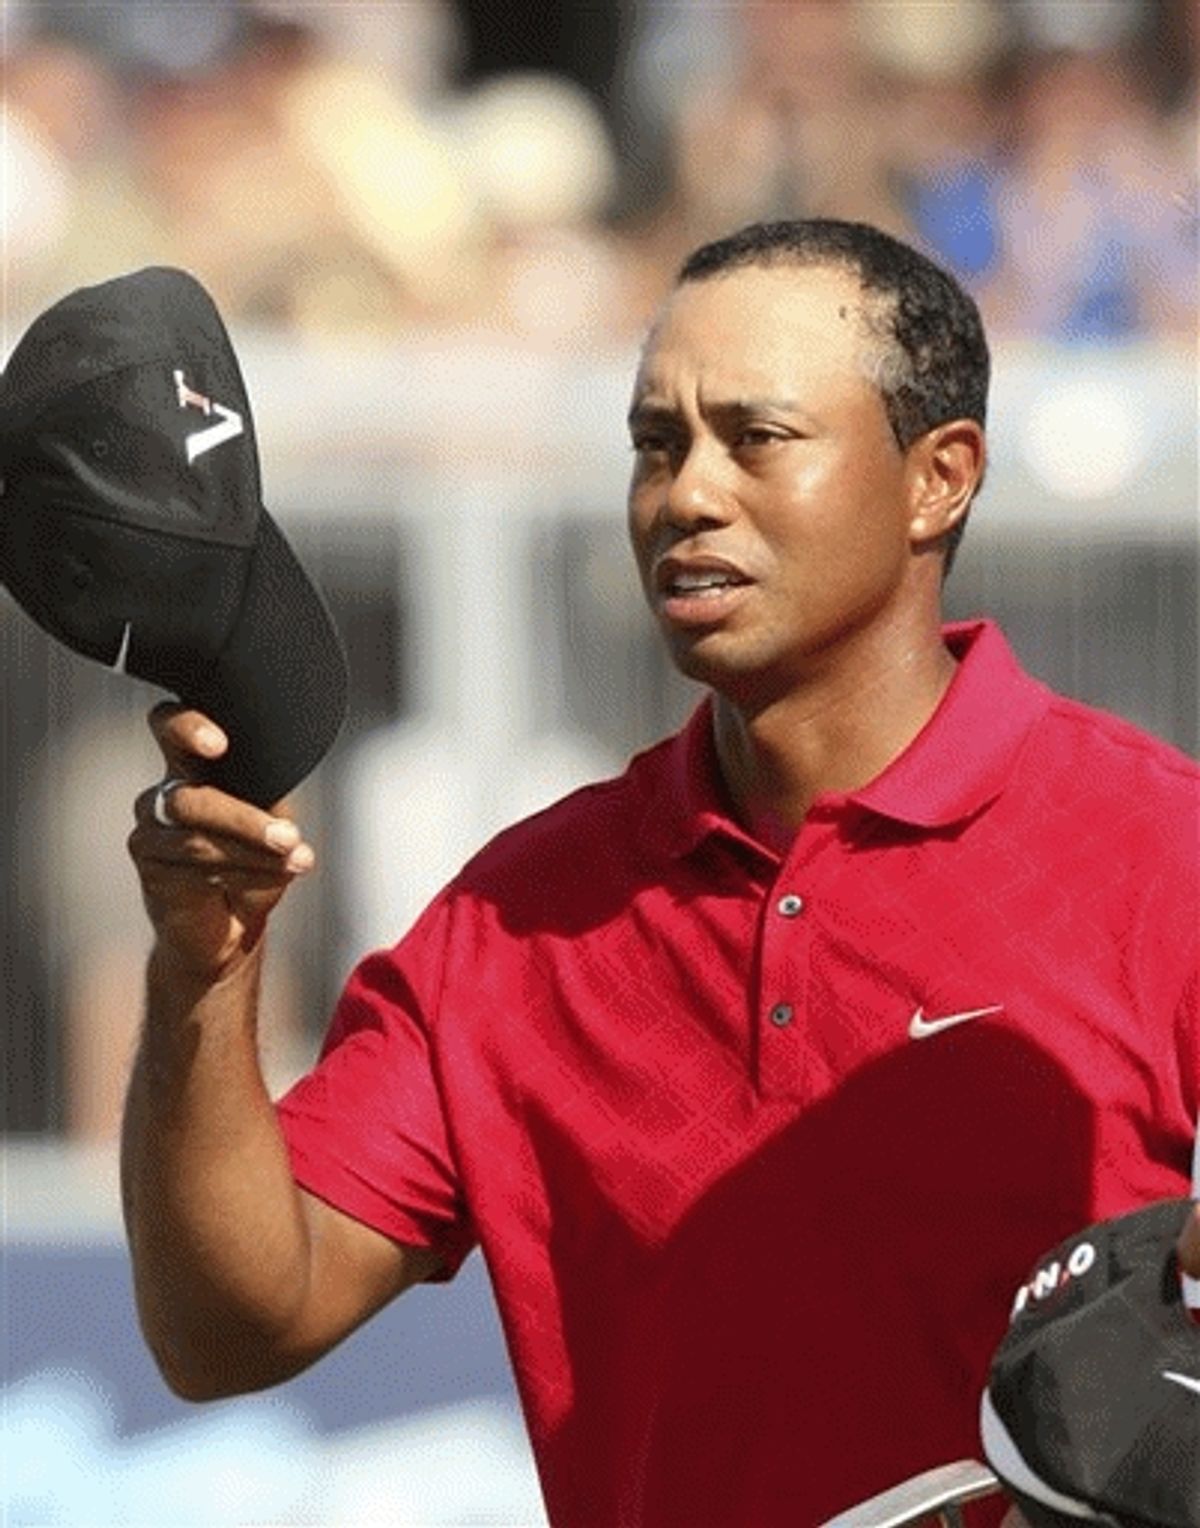 In this Nov. 15, 2009 file photo, Tiger Woods, tips his cap to the crowd after finishing his final hole in Melbourne, Australia, during the Australian Masters golf tournament.  (AP Photo/Rob Griffith, File)